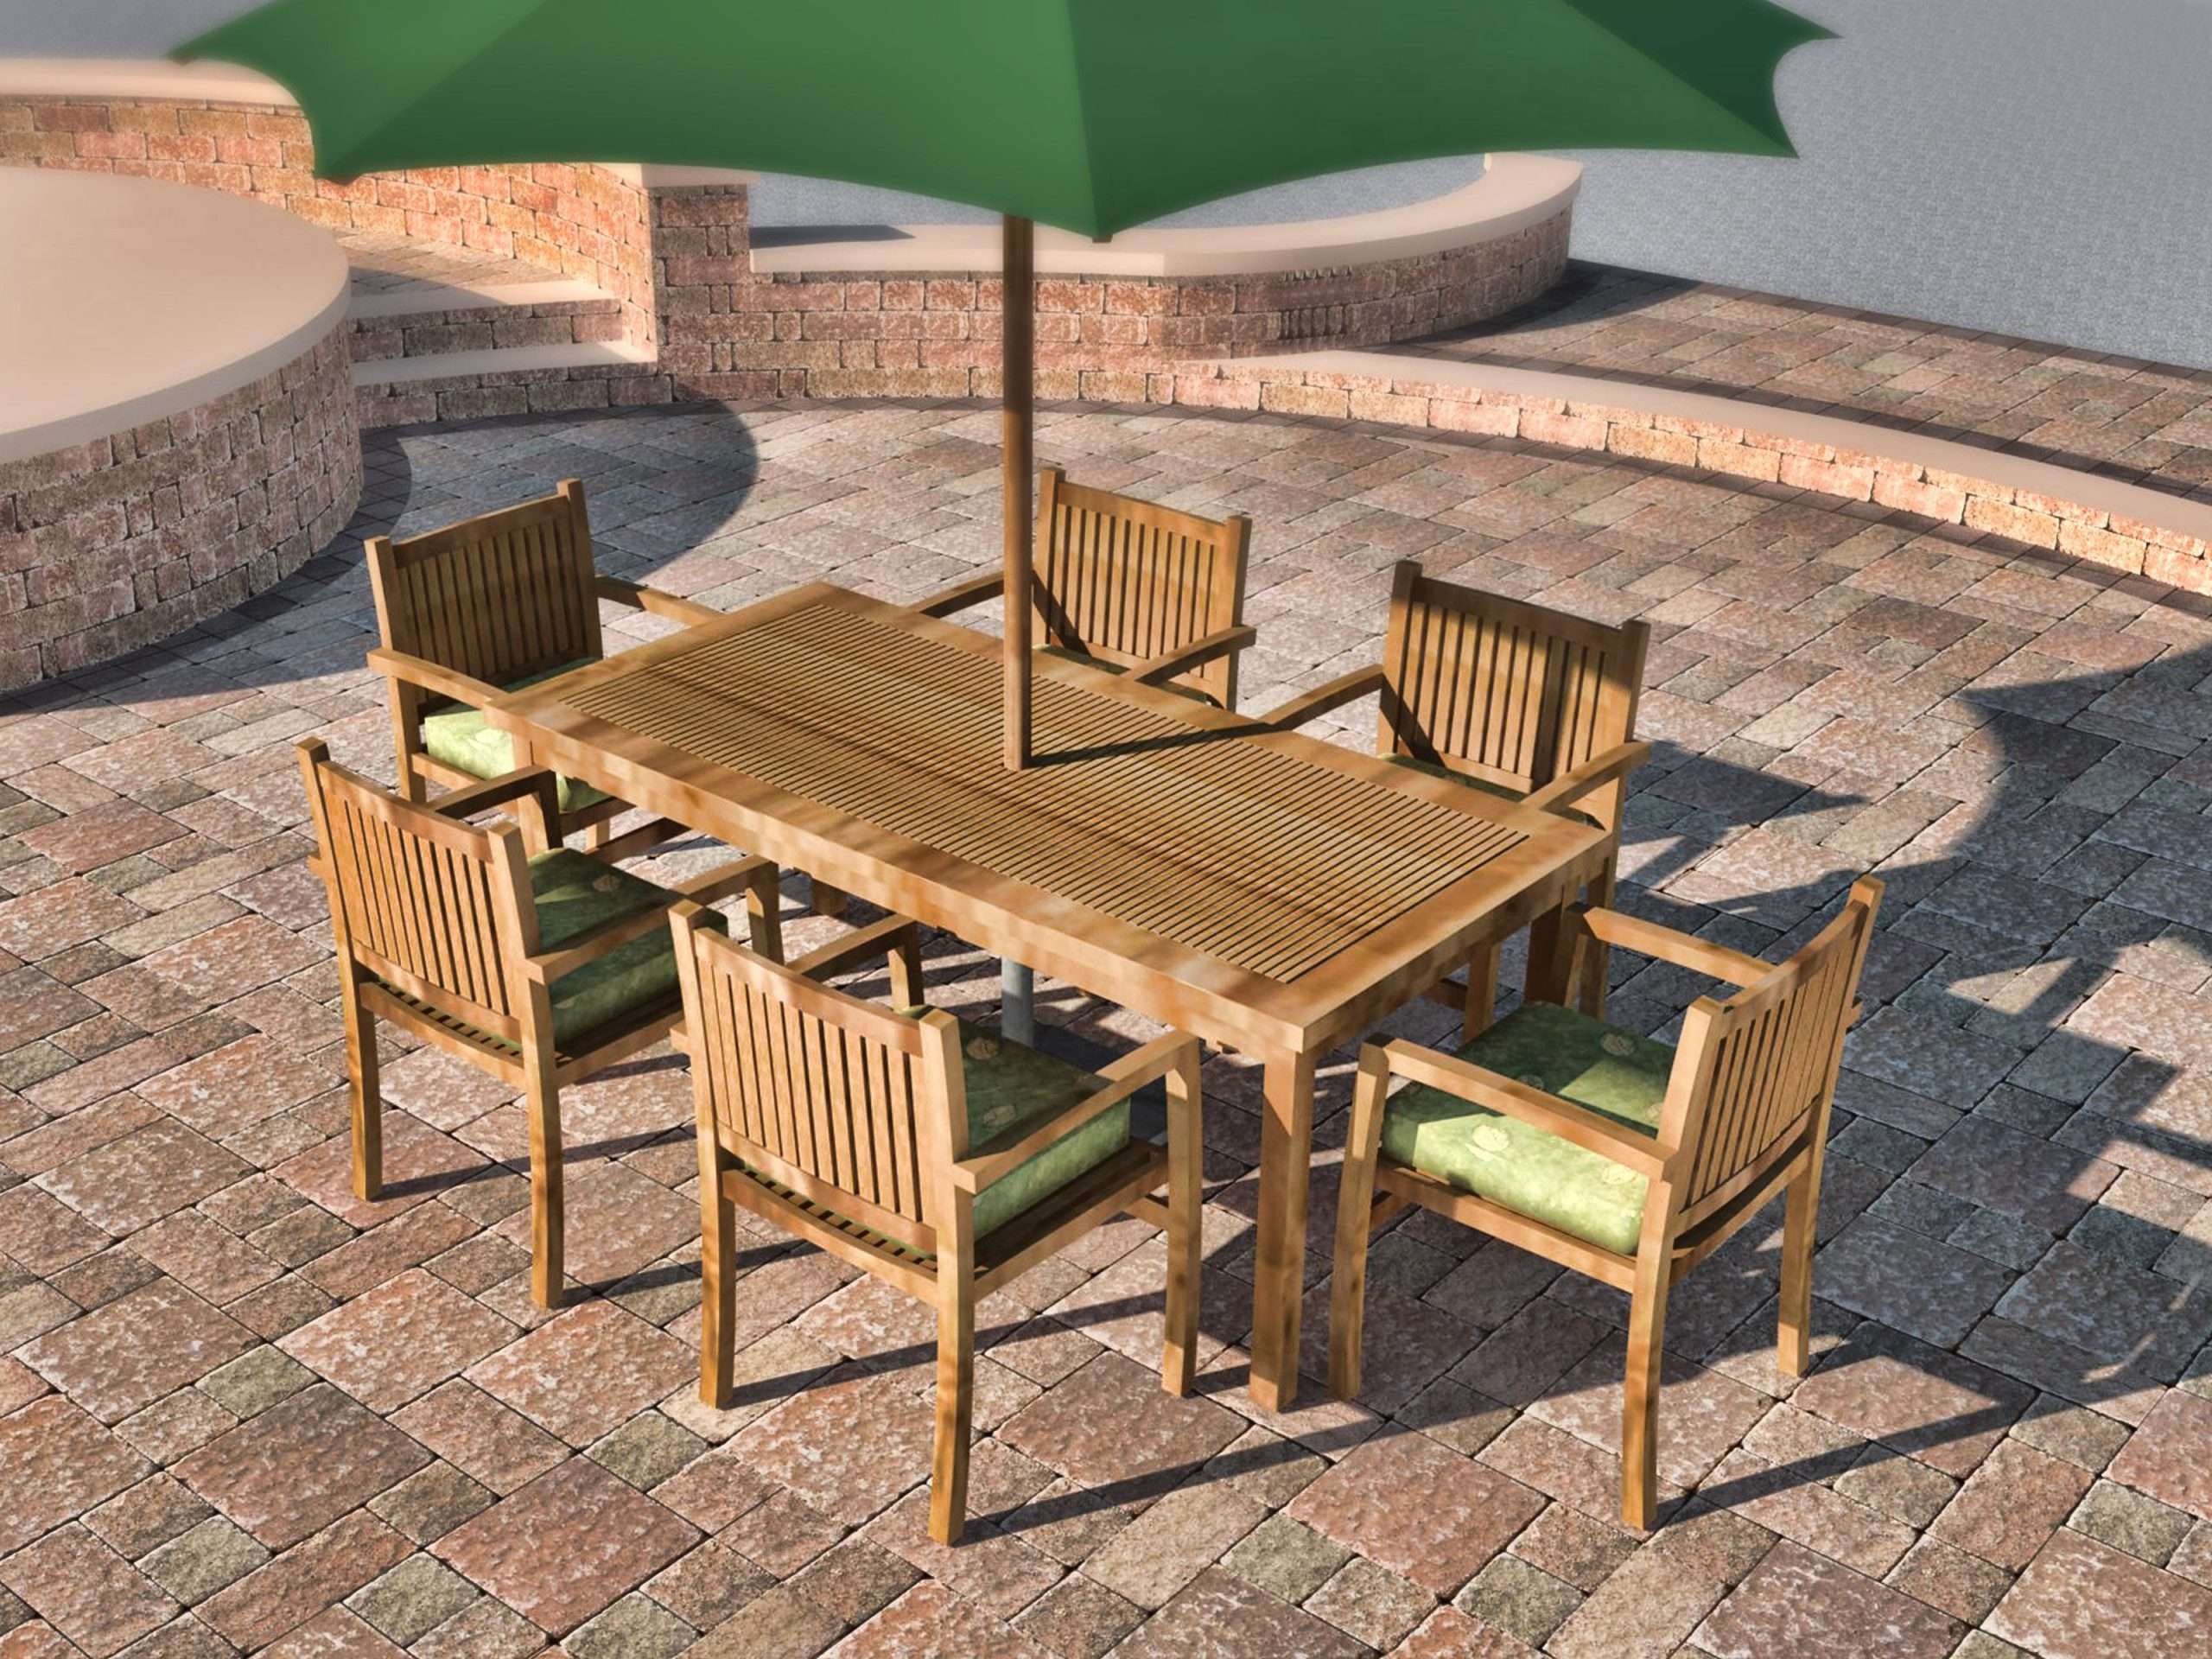 How to Protect Outdoor Furniture